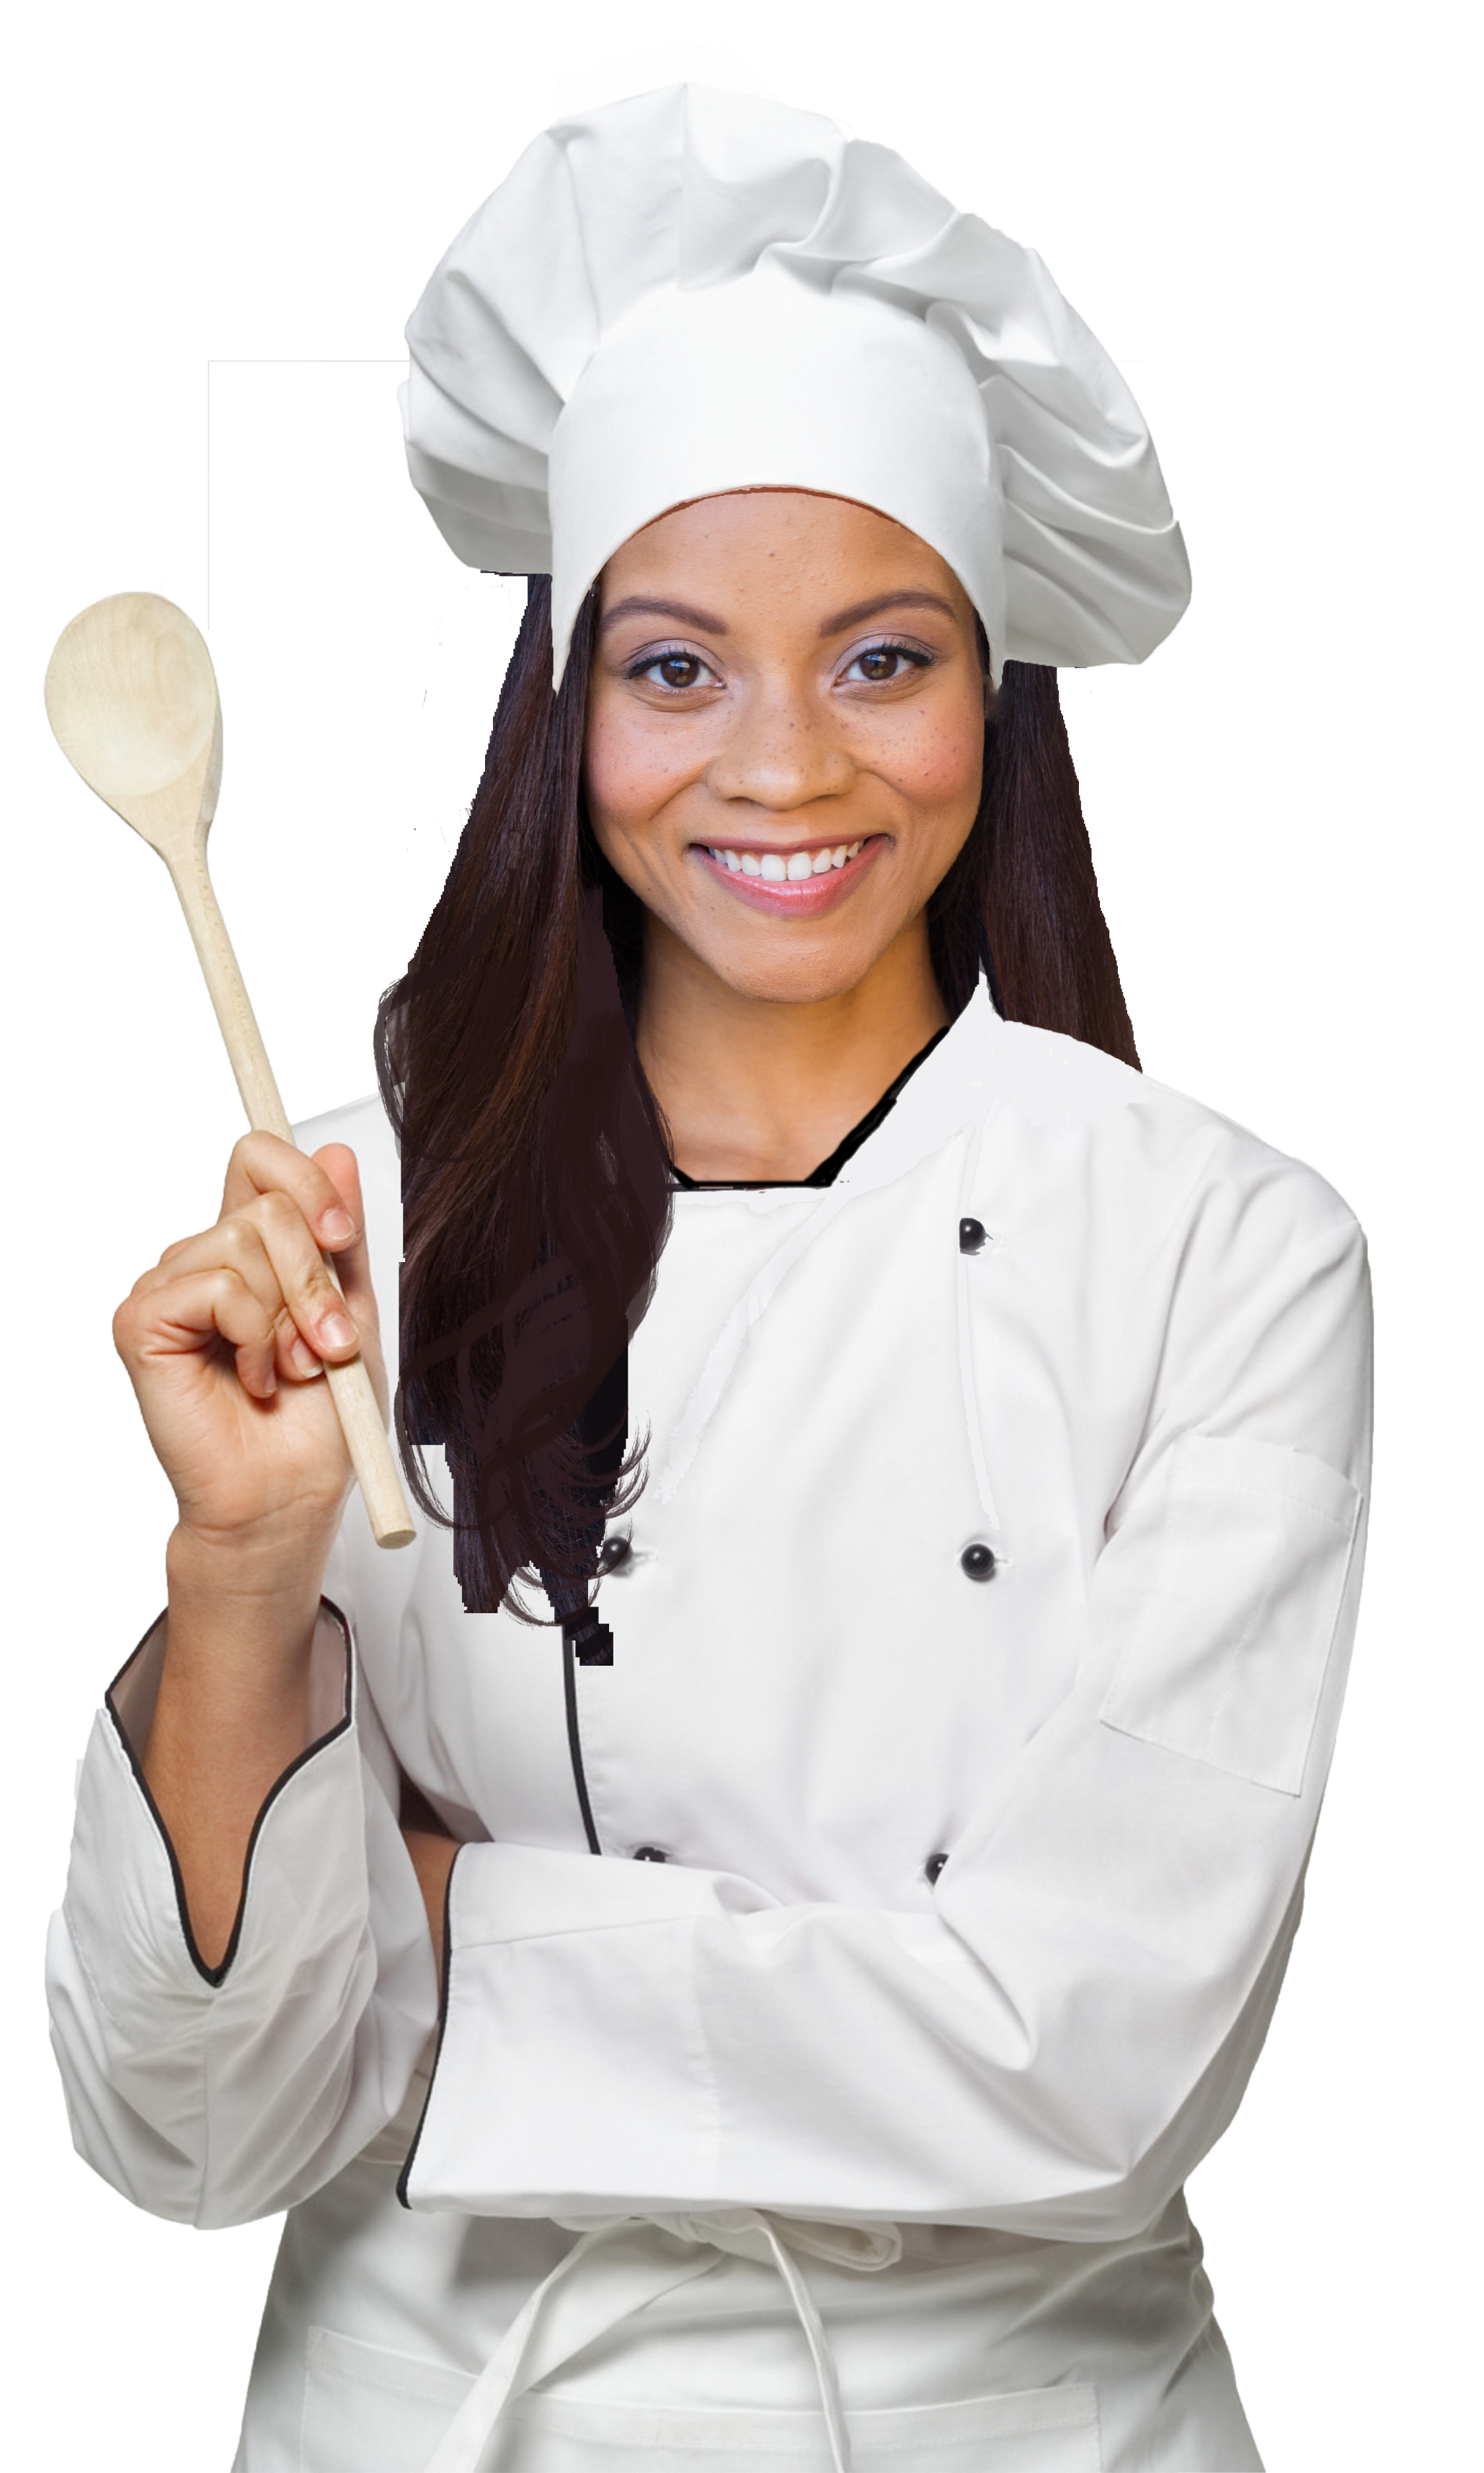 Chef Png